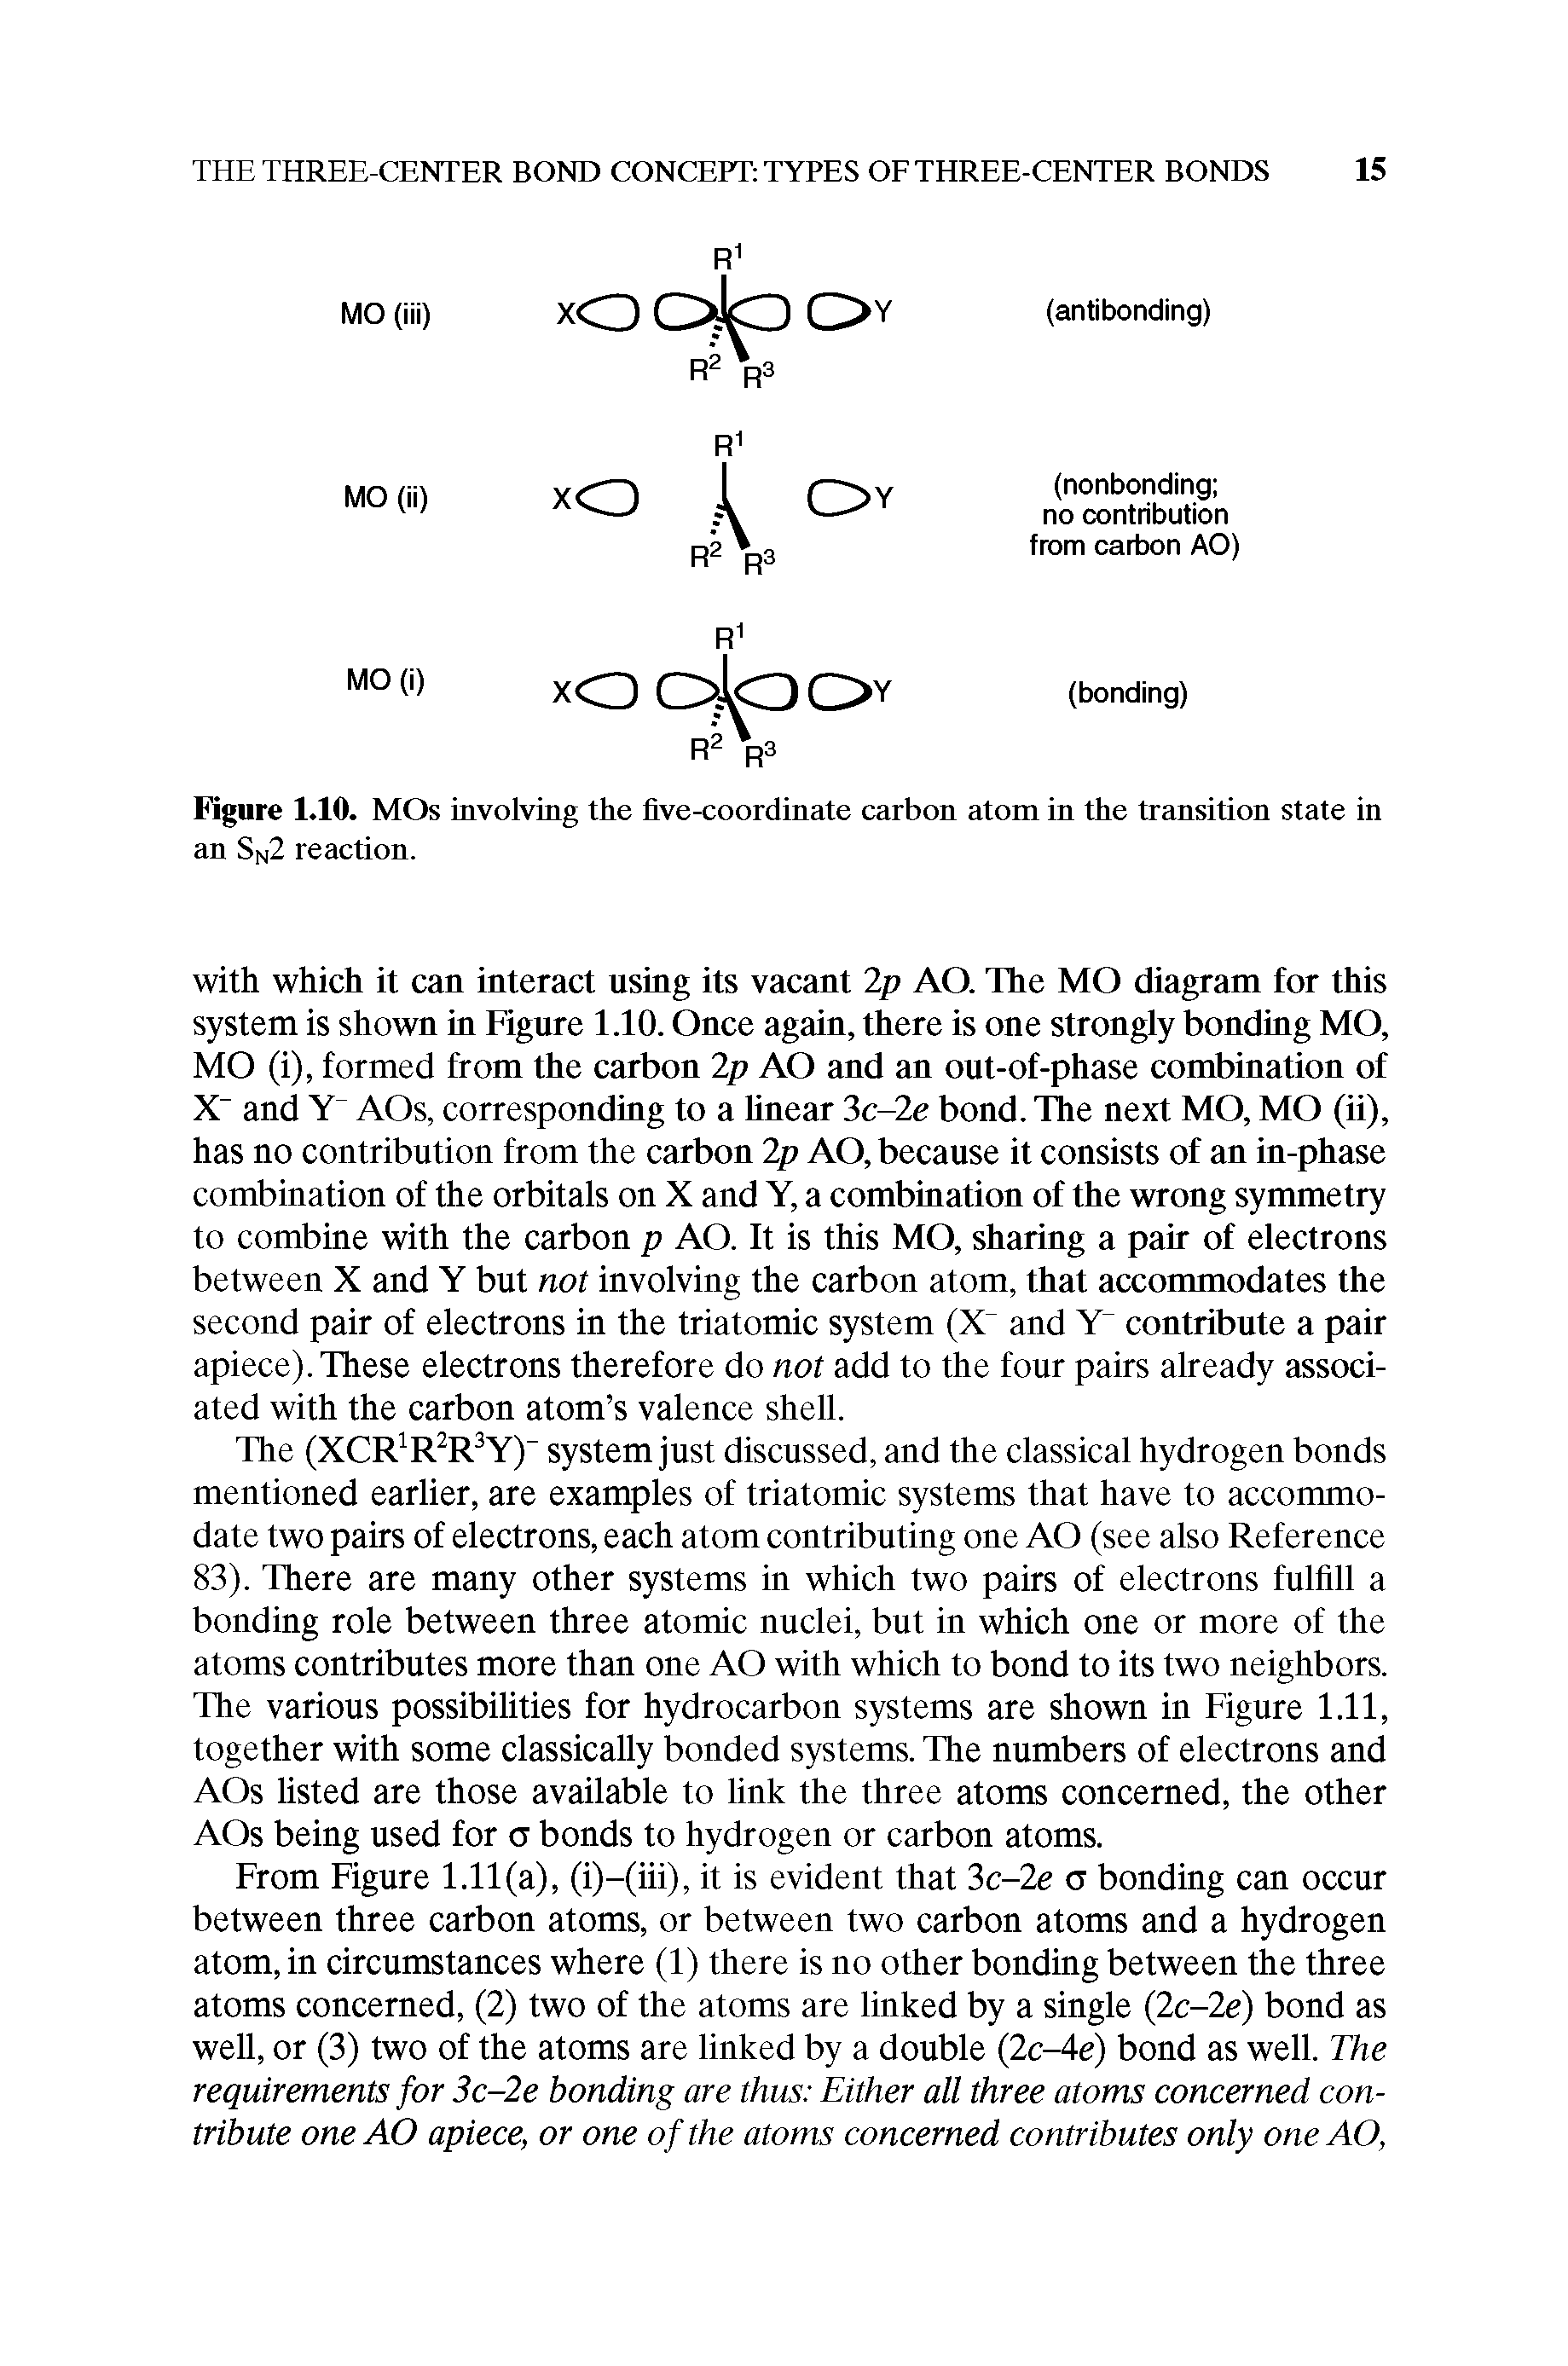 Figure 1.10. MOs mvolving the five-coordinate carbon atom in the transition state in an Sn2 reaction.